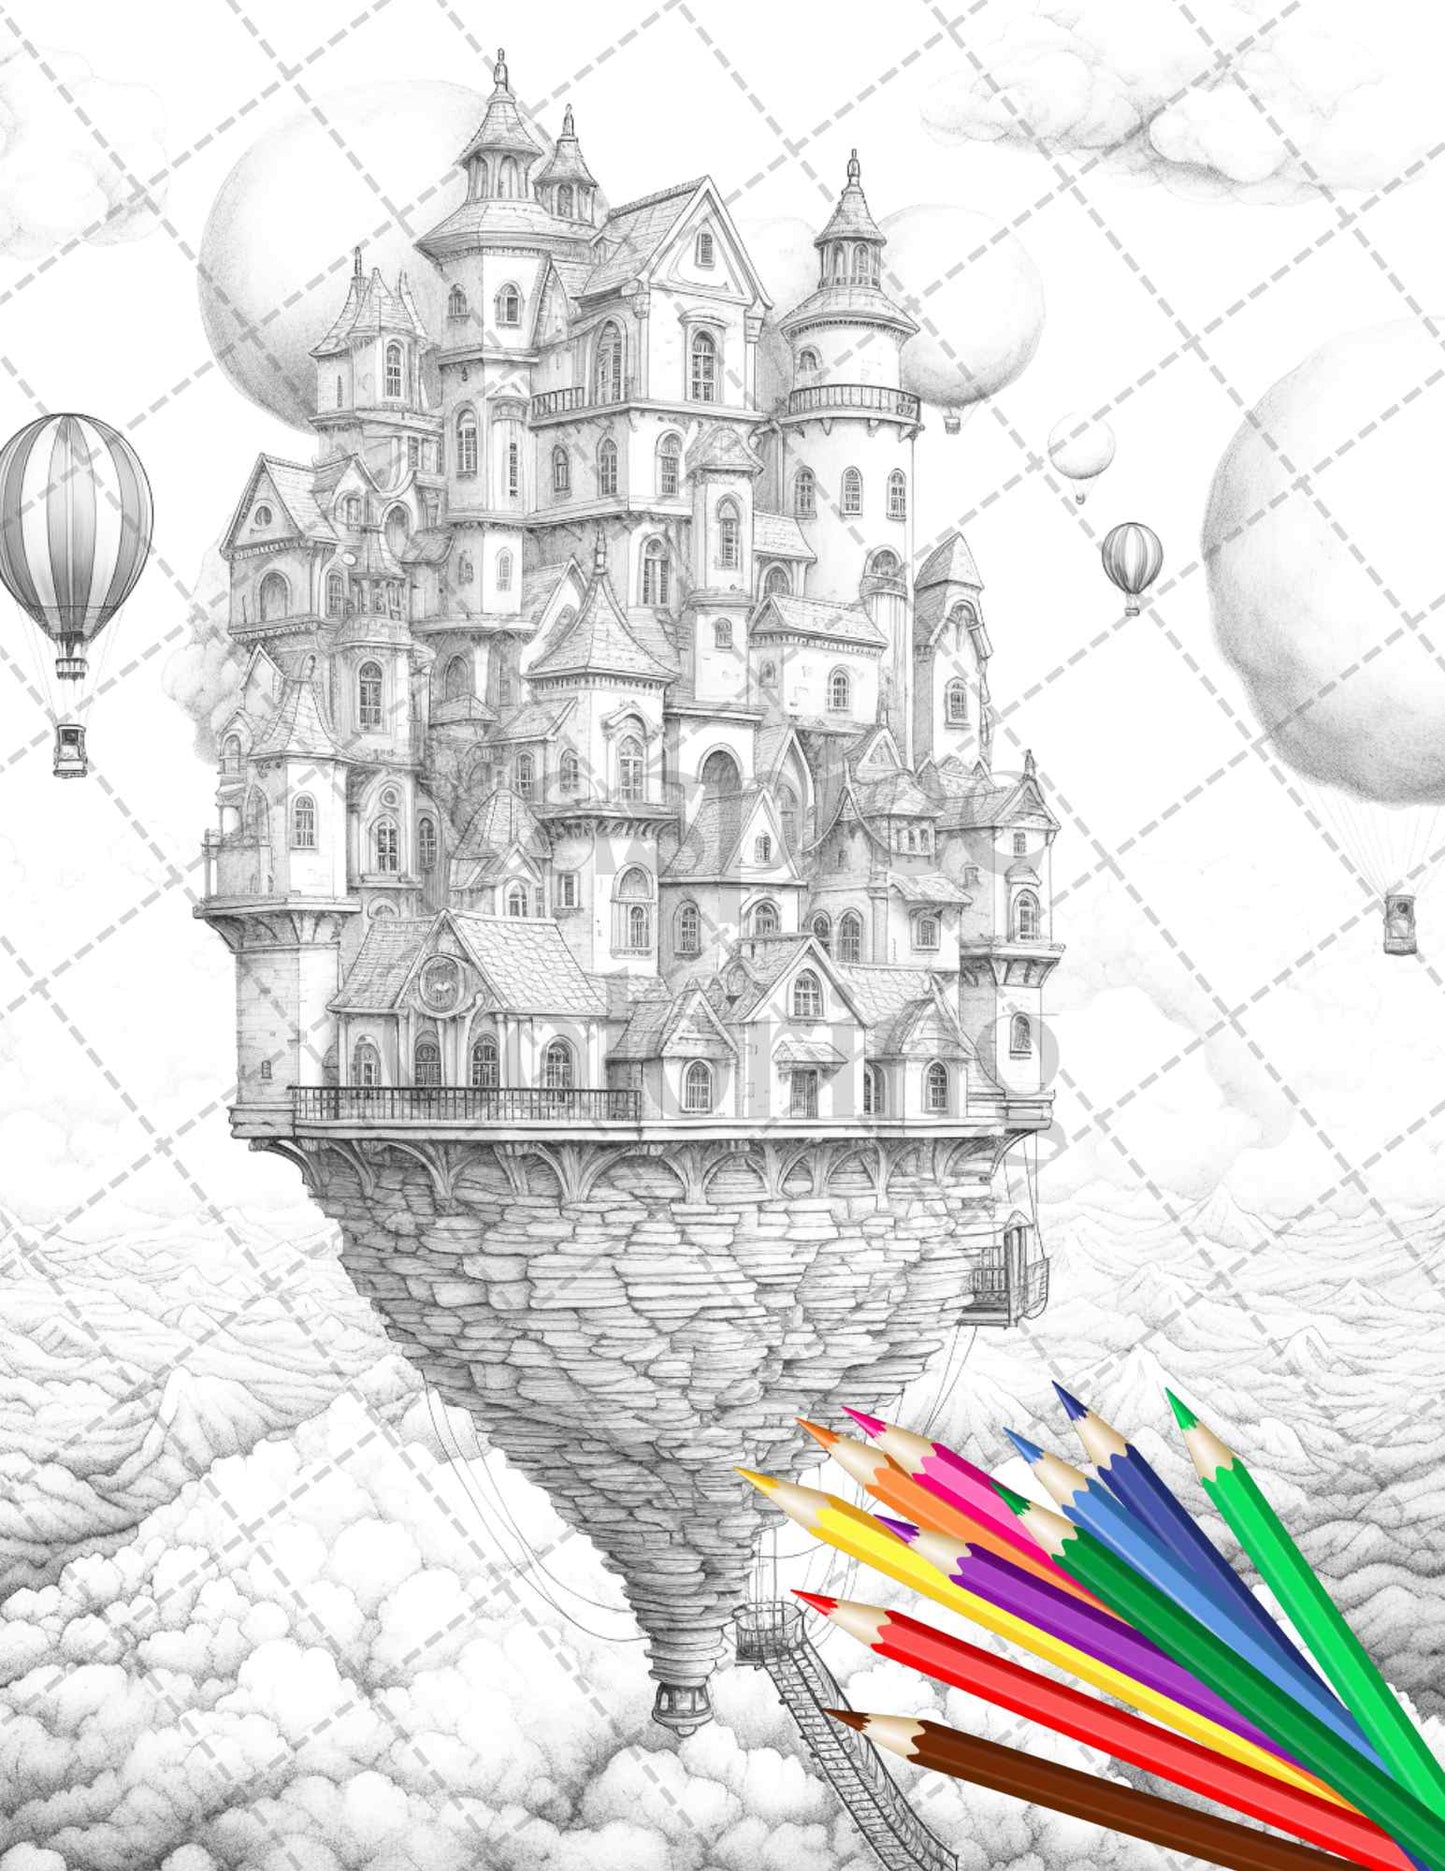 fantasy sky house grayscale coloring page, adult printable coloring page, black and white coloring design, grayscale coloring for adults, detailed fantasy coloring sheet, intricate printable coloring art, stress-relieving grayscale image, mindful coloring page for adults, art therapy grayscale picture, printable sky houses coloring